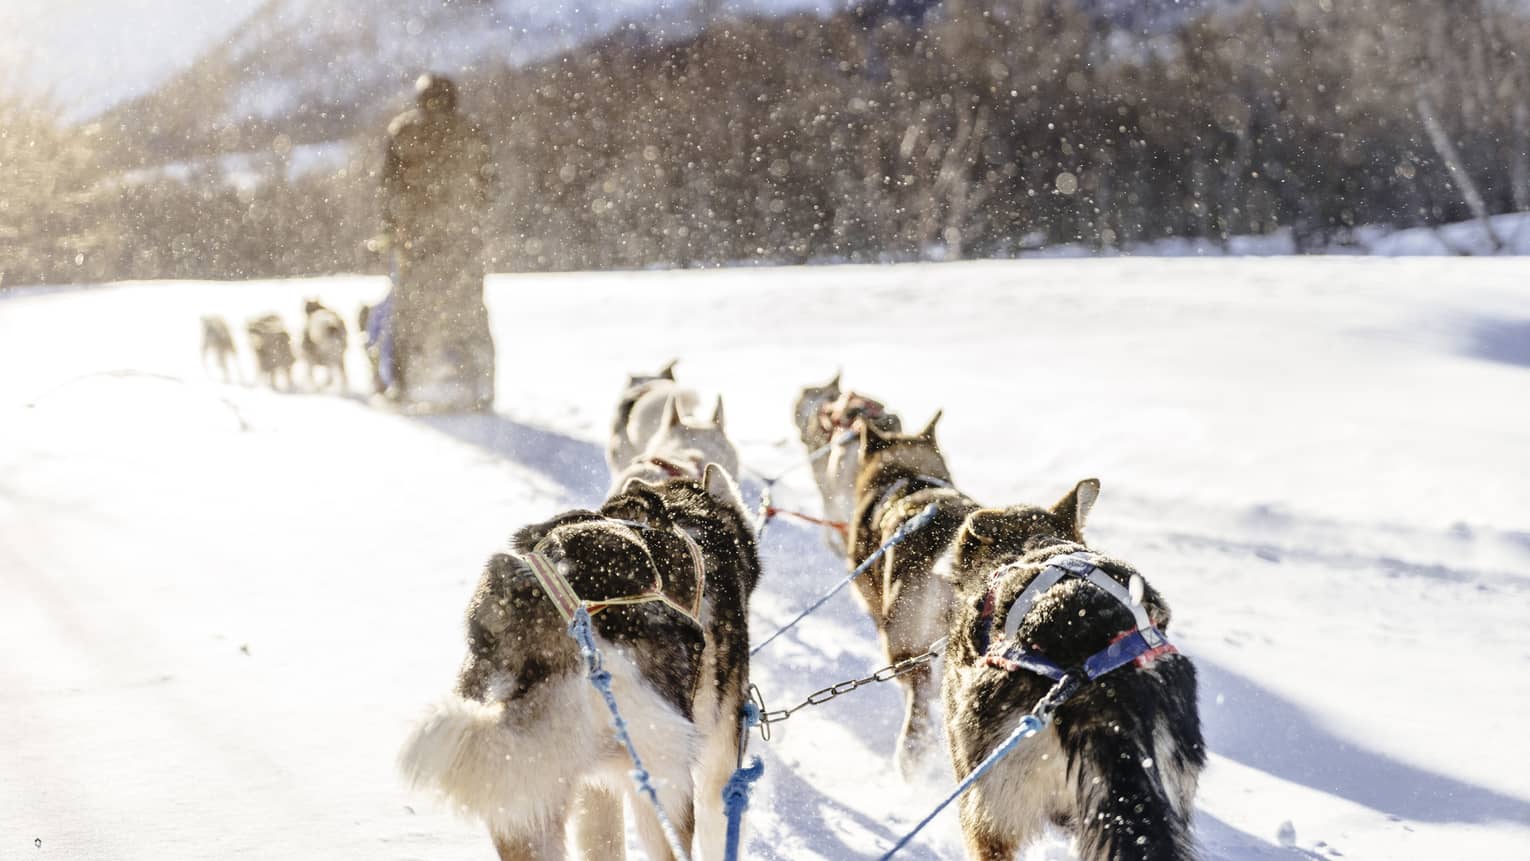 A group of dogs pulling a man on a sled over white snow, with trees and mountains in the distance.